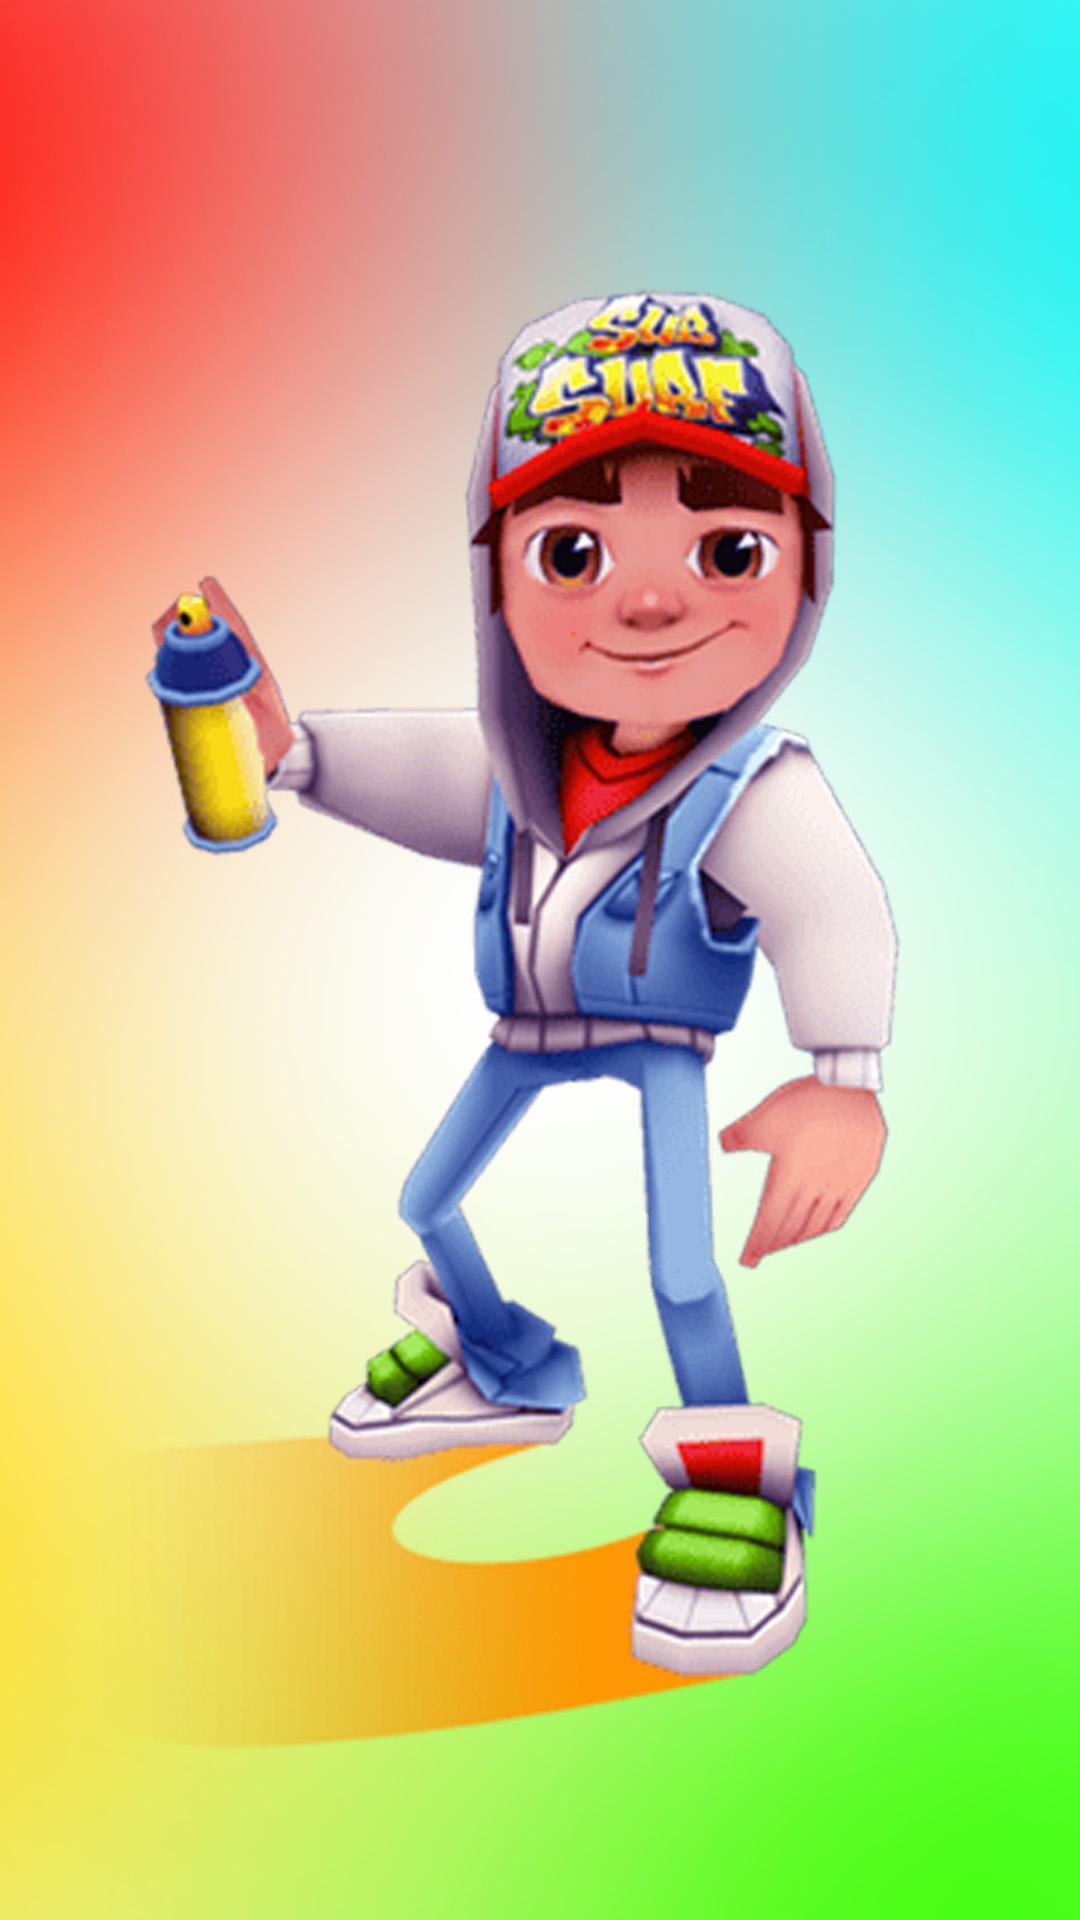 Subway Surfers Wallpaper for Android